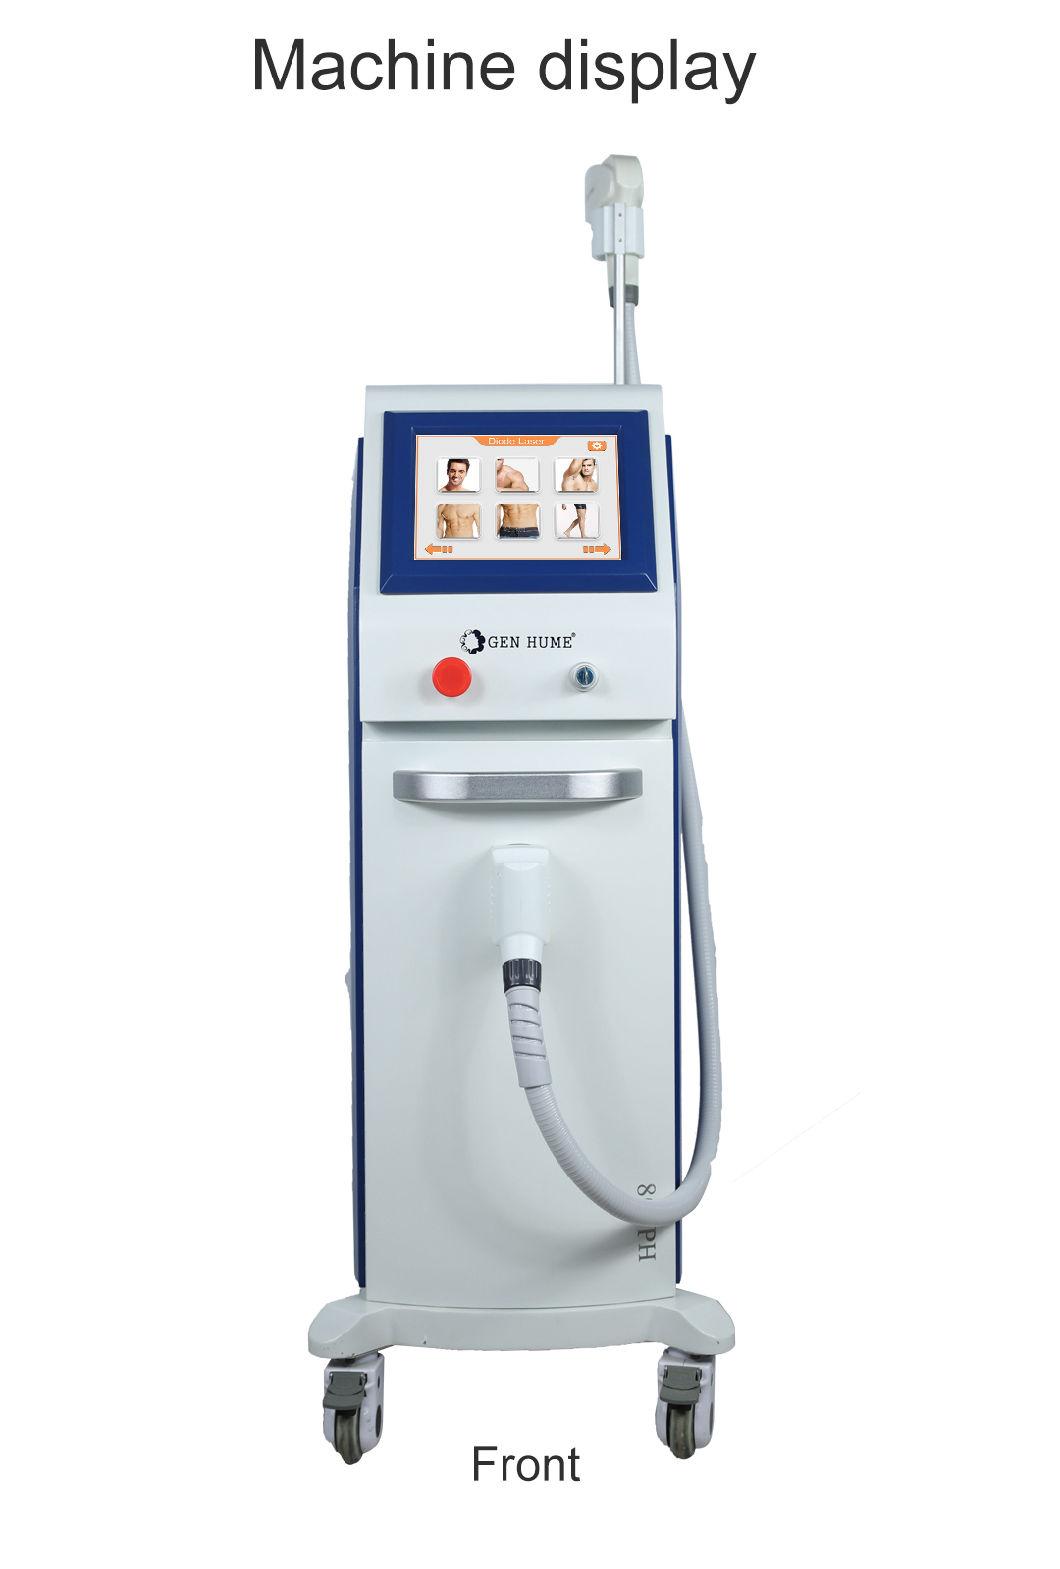 Laser for Hair Removal Salon Machine 808nm Machine Beauty Equipment Hair Removal Diode Laser